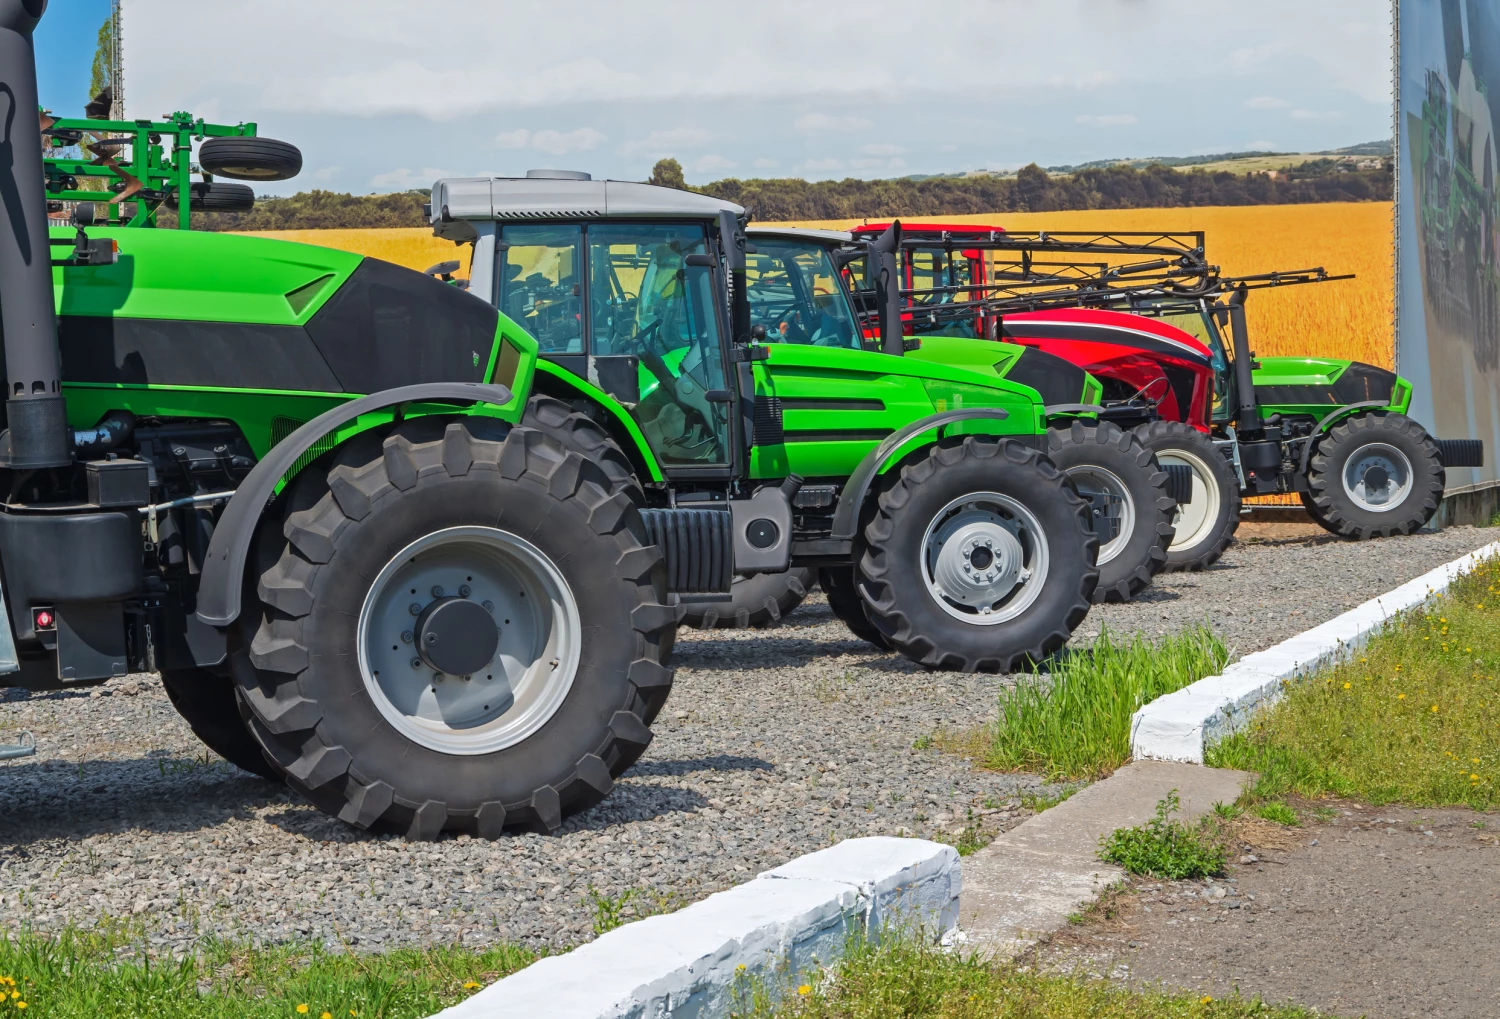 tractors lined up at show